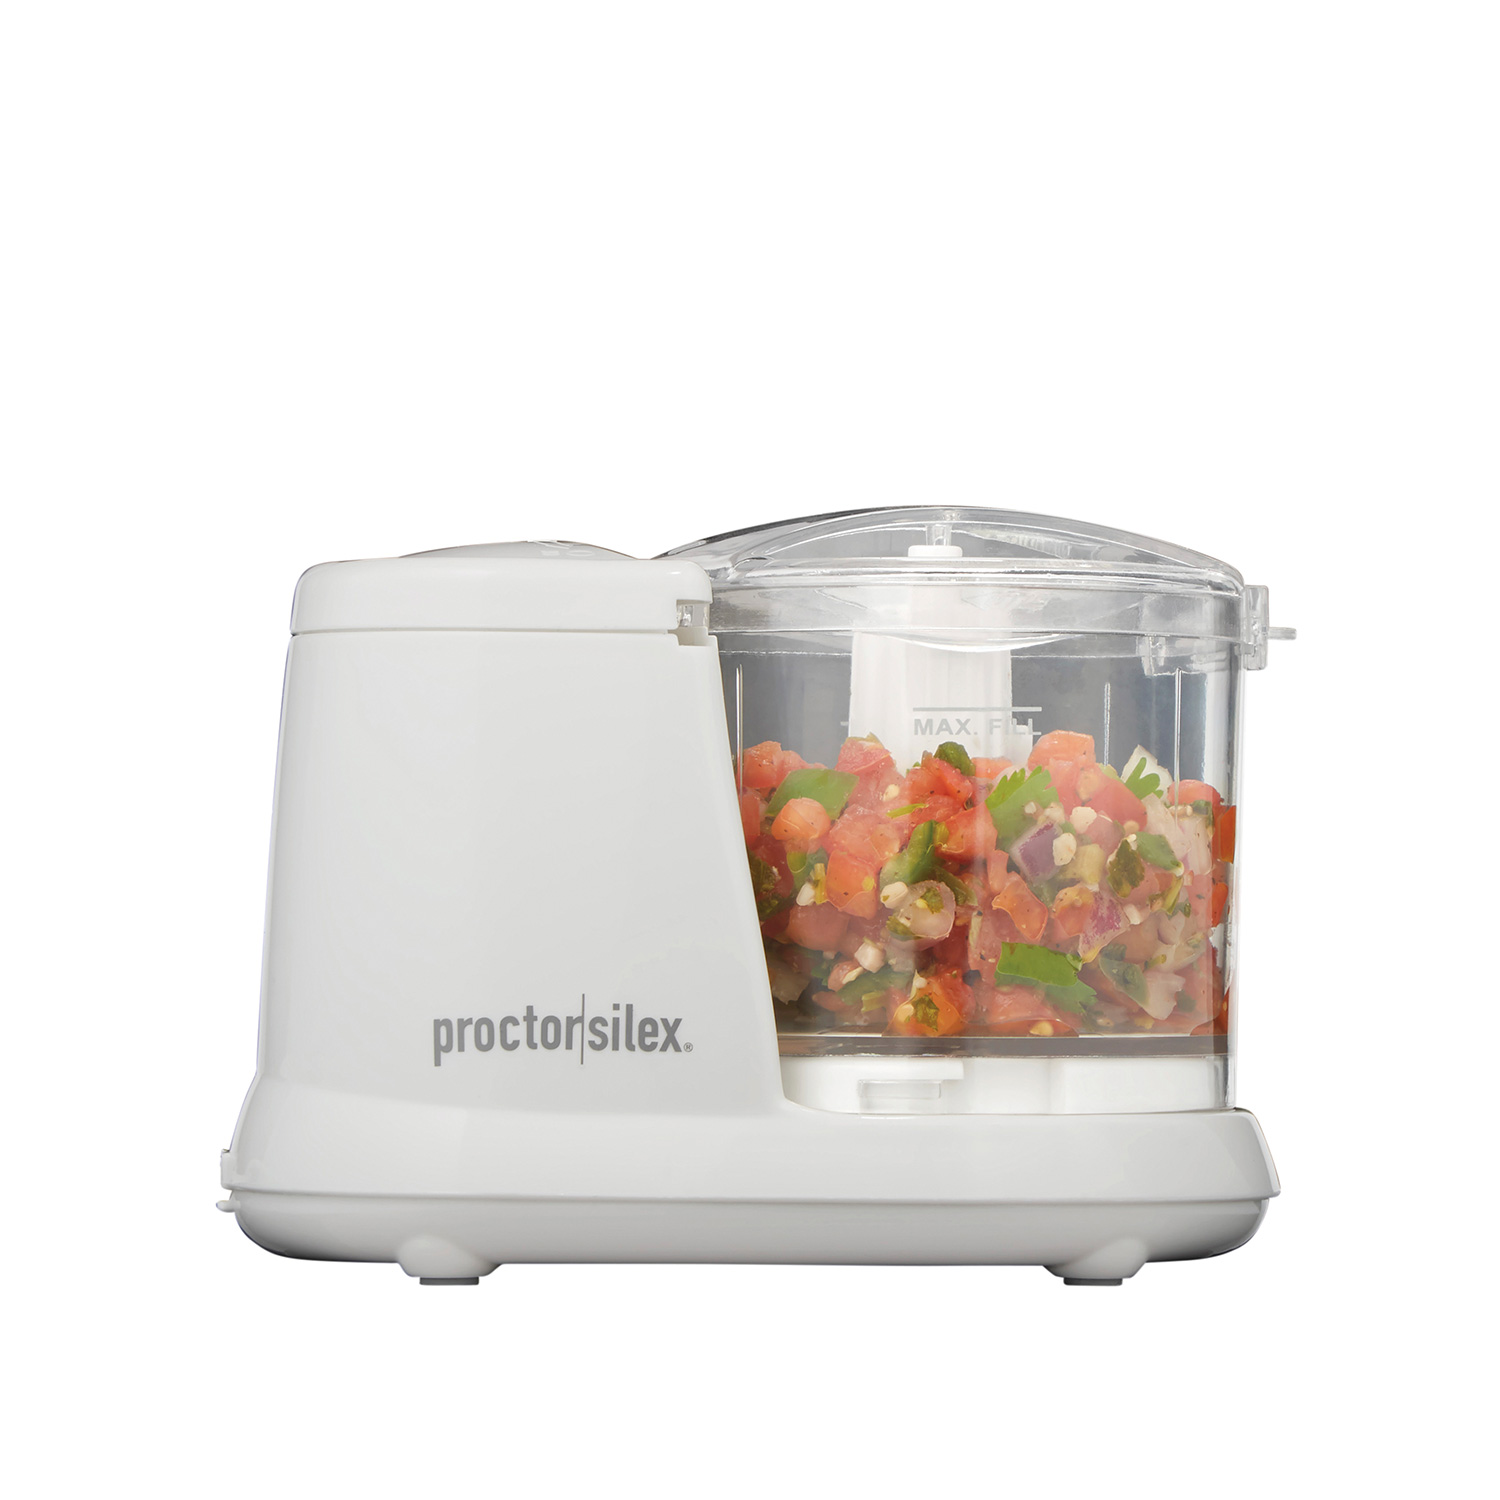 1.5 Cup Food Chopper, White - Model 72500PS